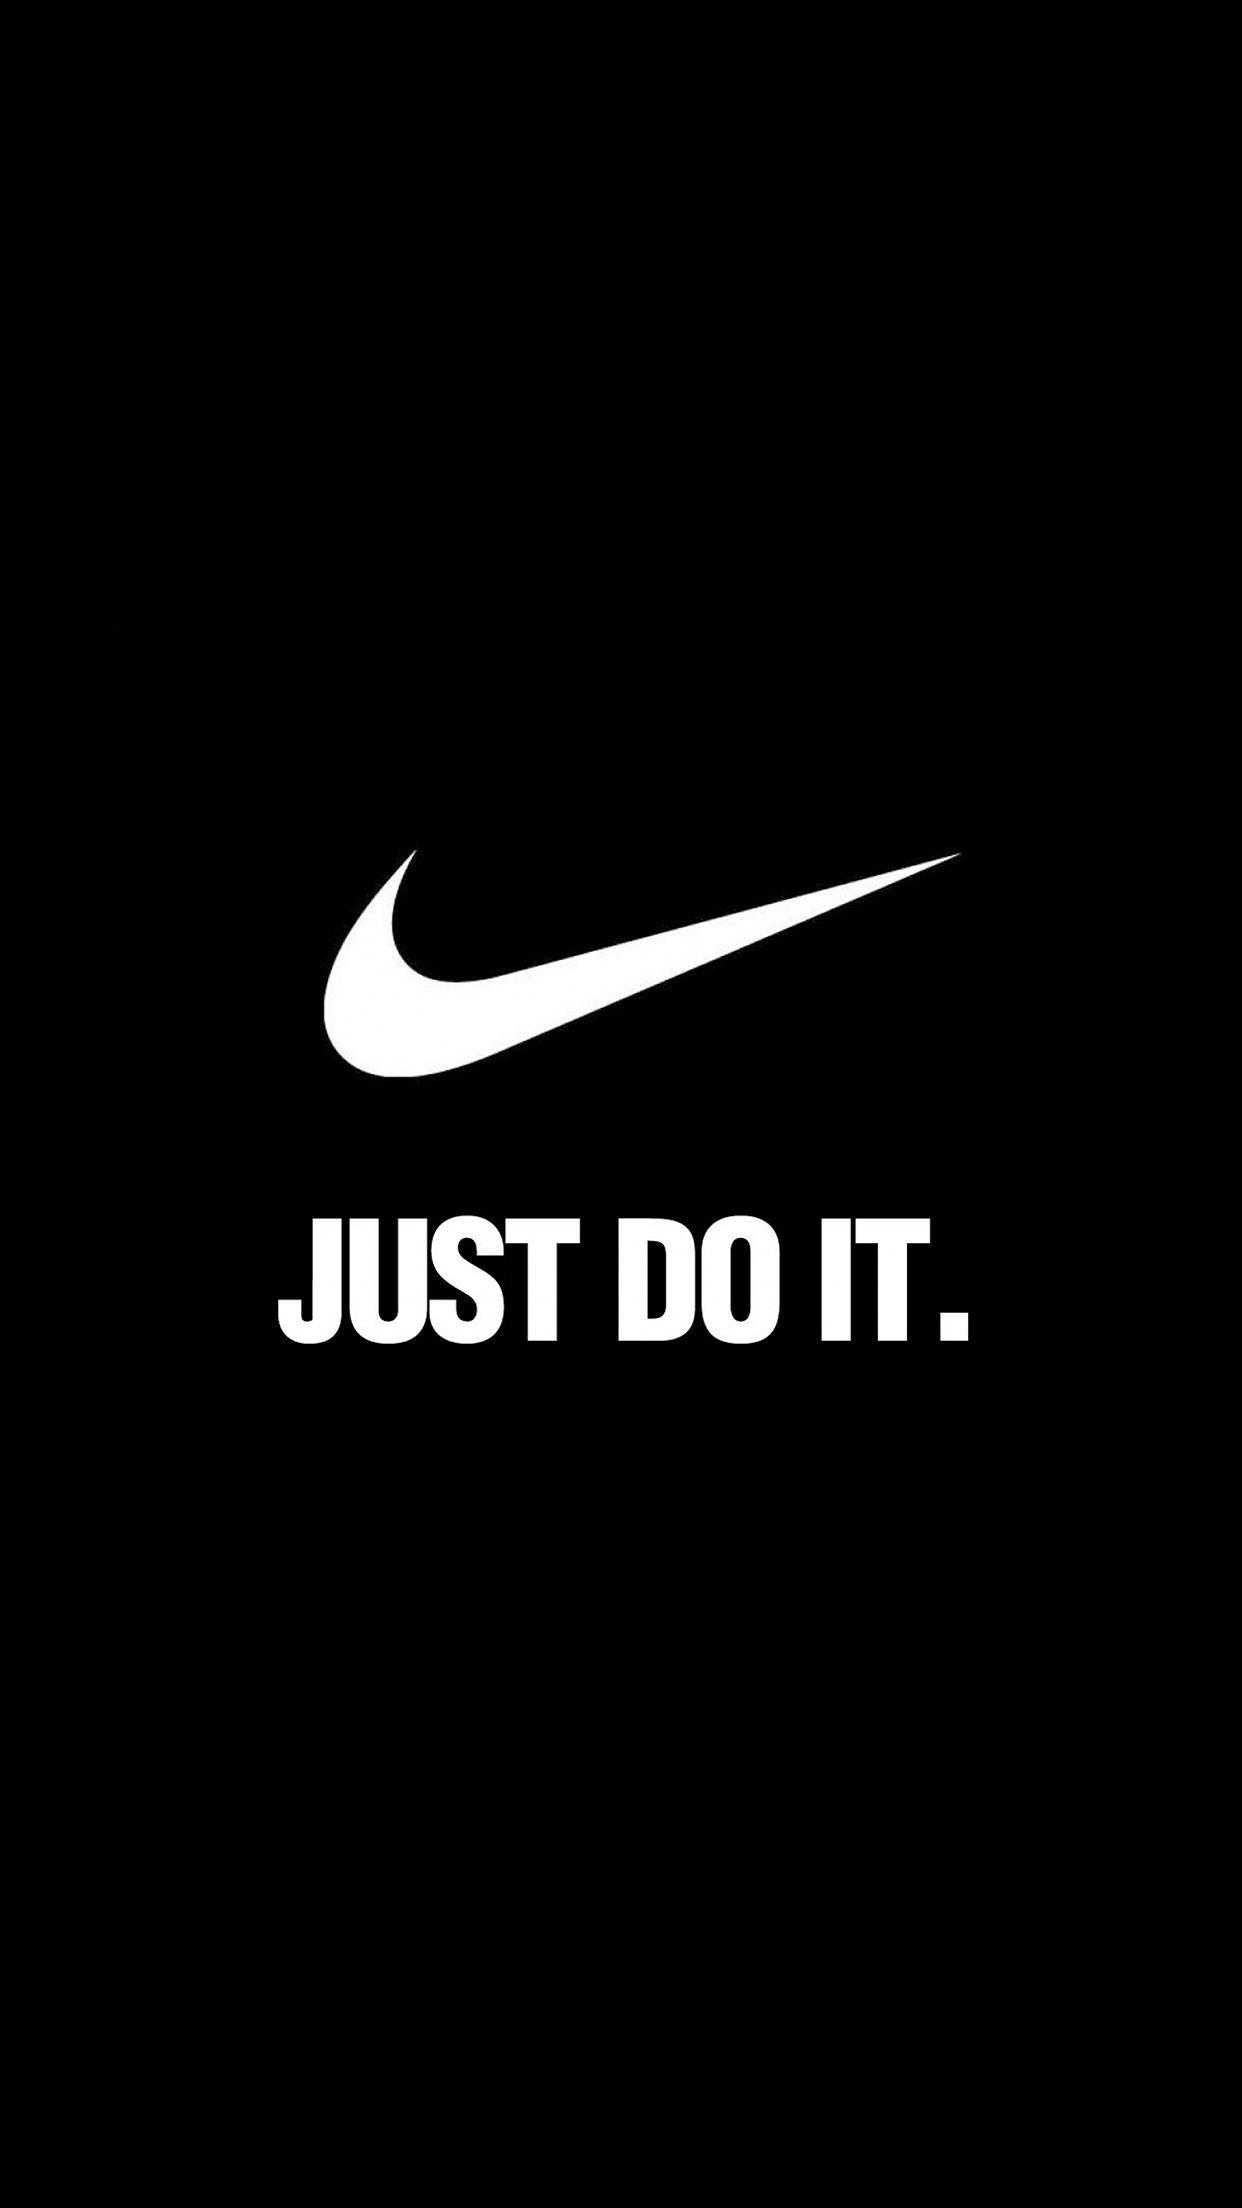 Just do it wallpaper for Iphone